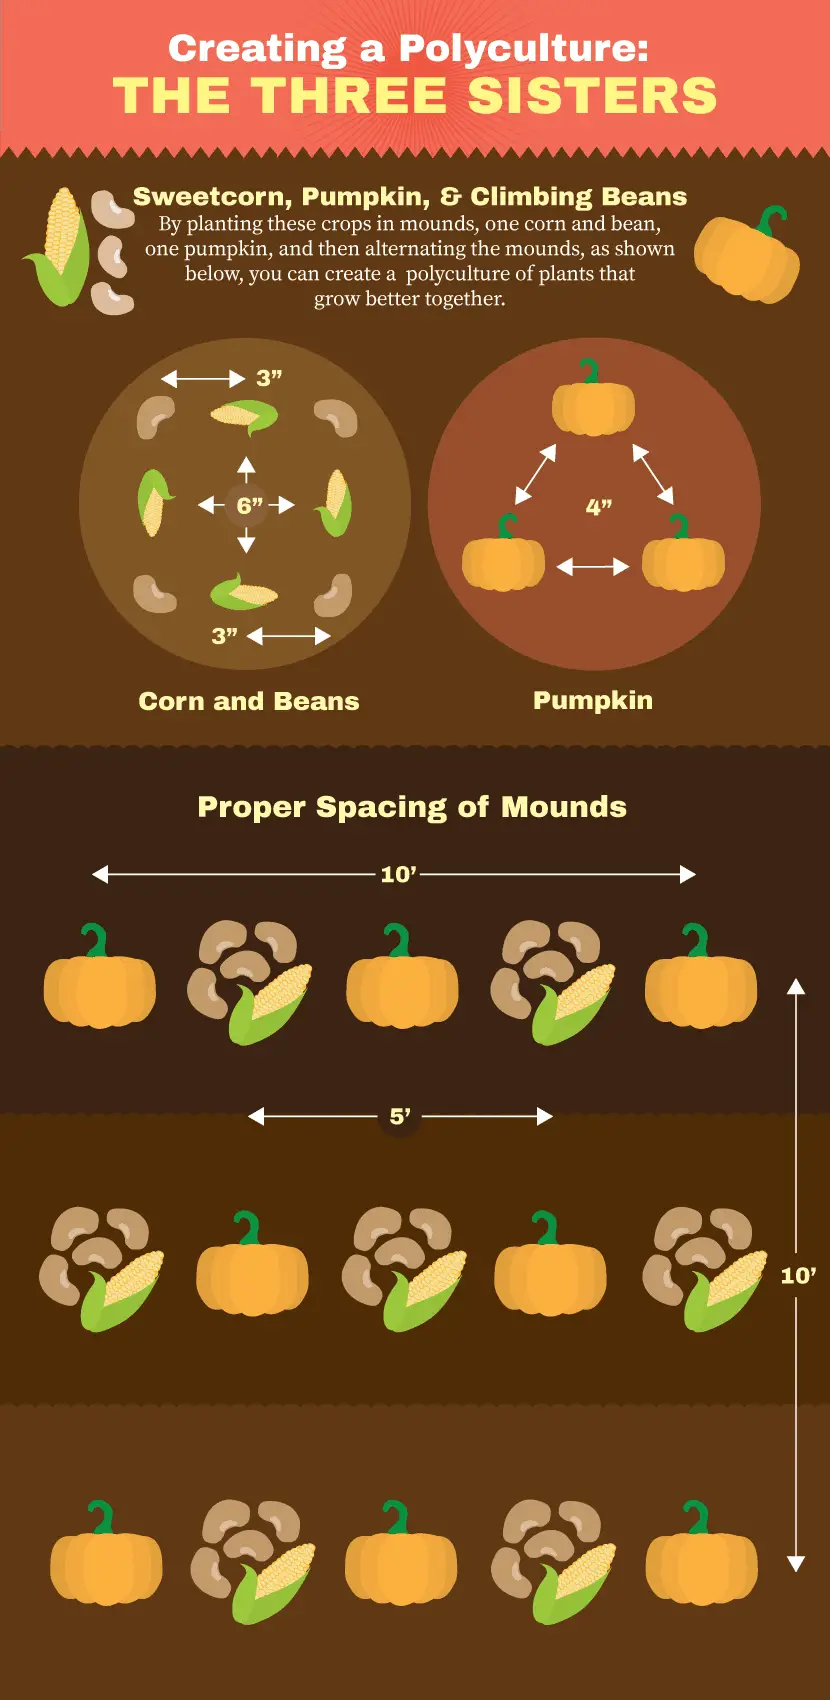 A Guide In Creating A Polyculture and Proper Spacing of Mounds